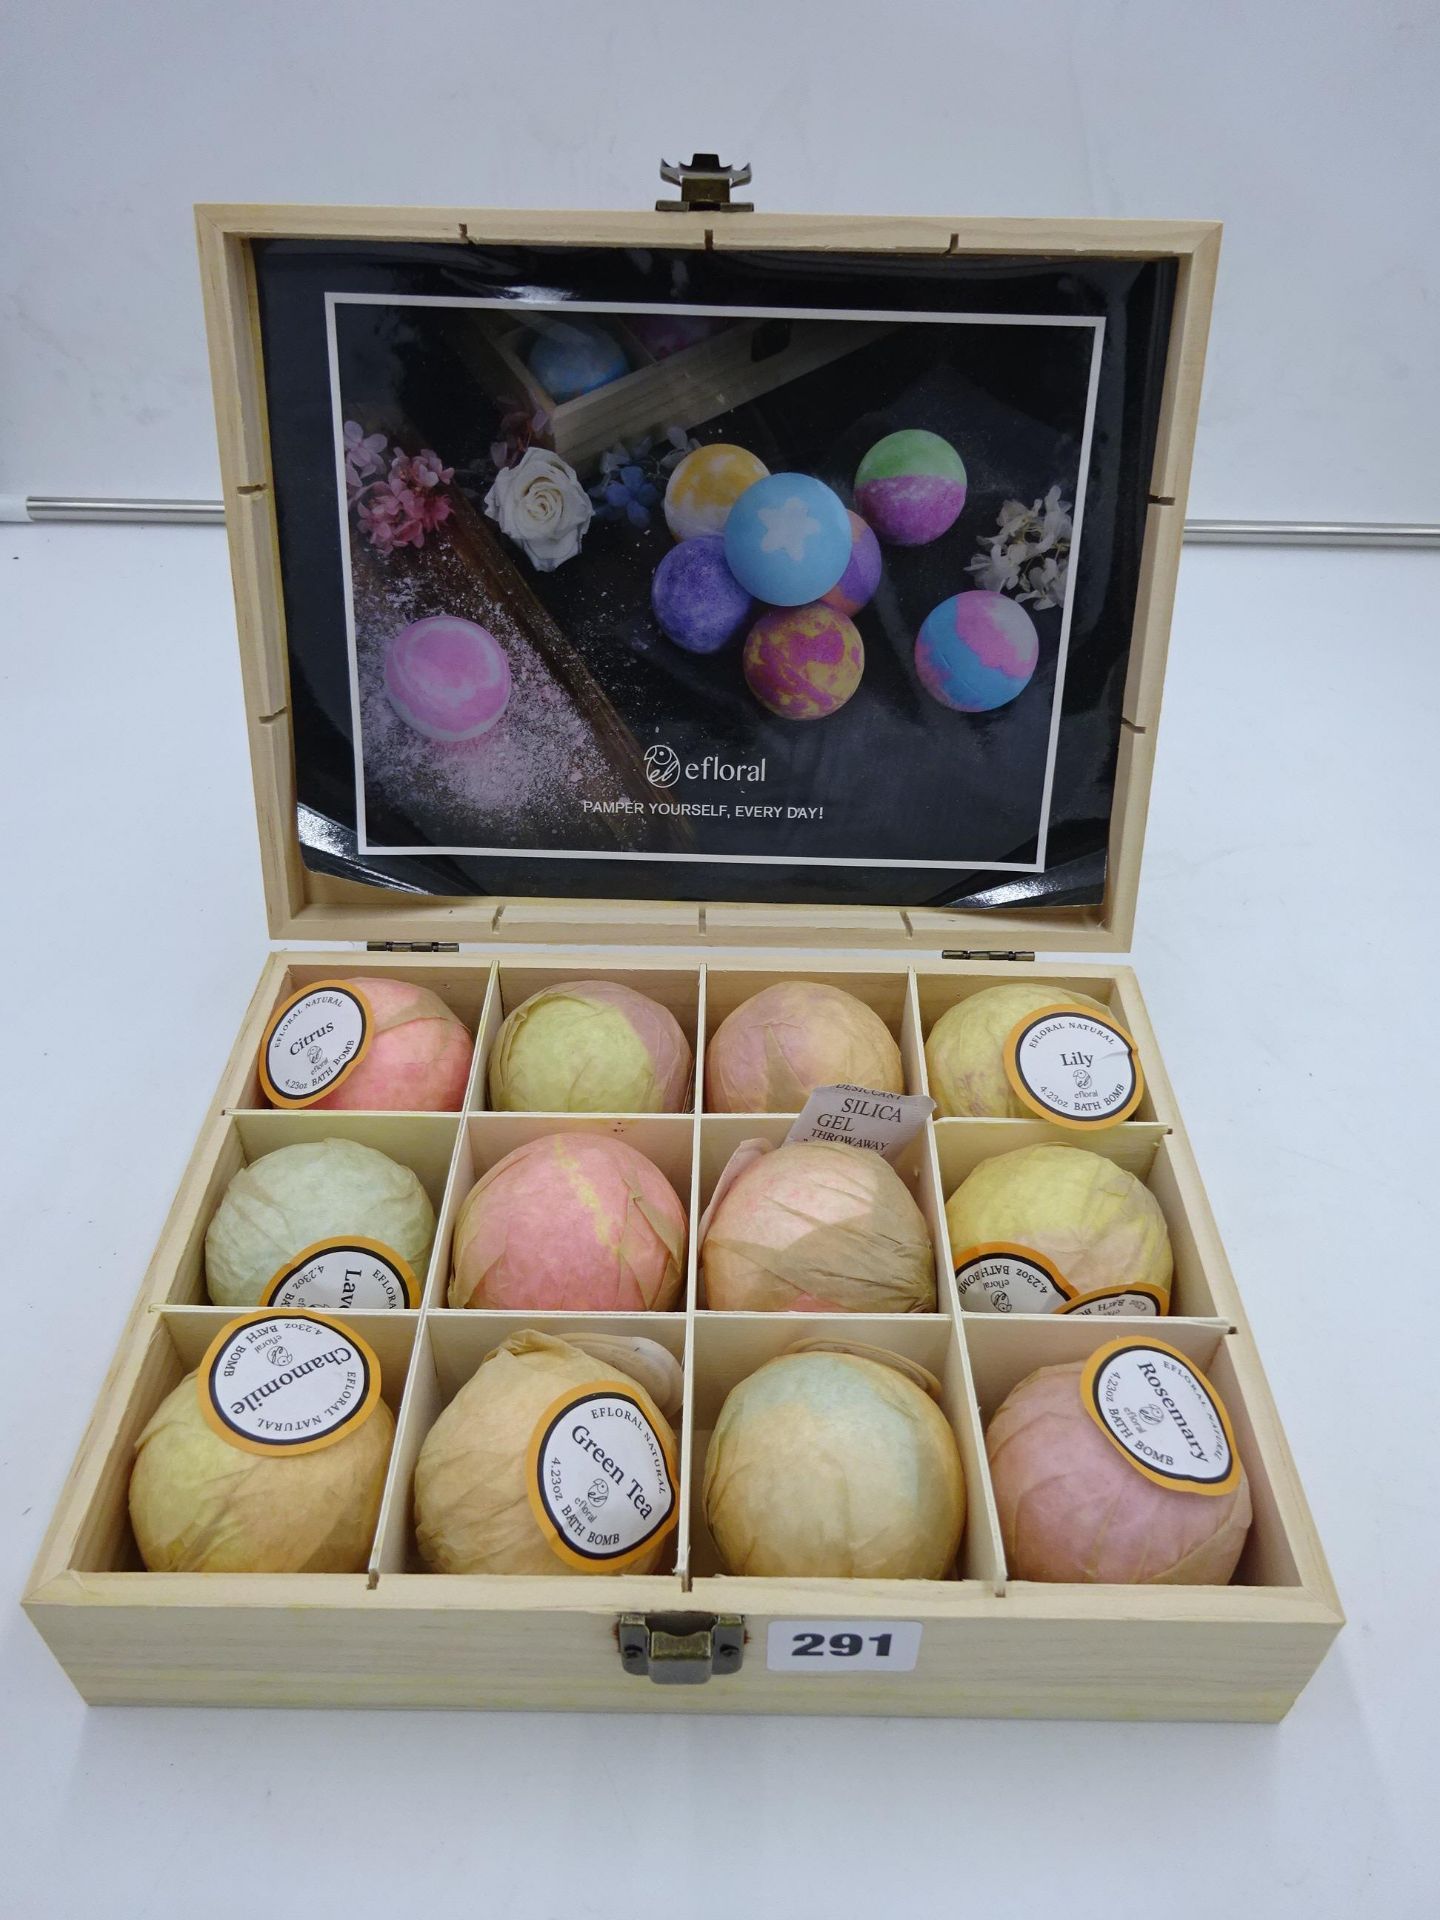 RRP £39.99 - NEW SET OF 12 BATH BOMBS INTO WOODEN GIFT BOX